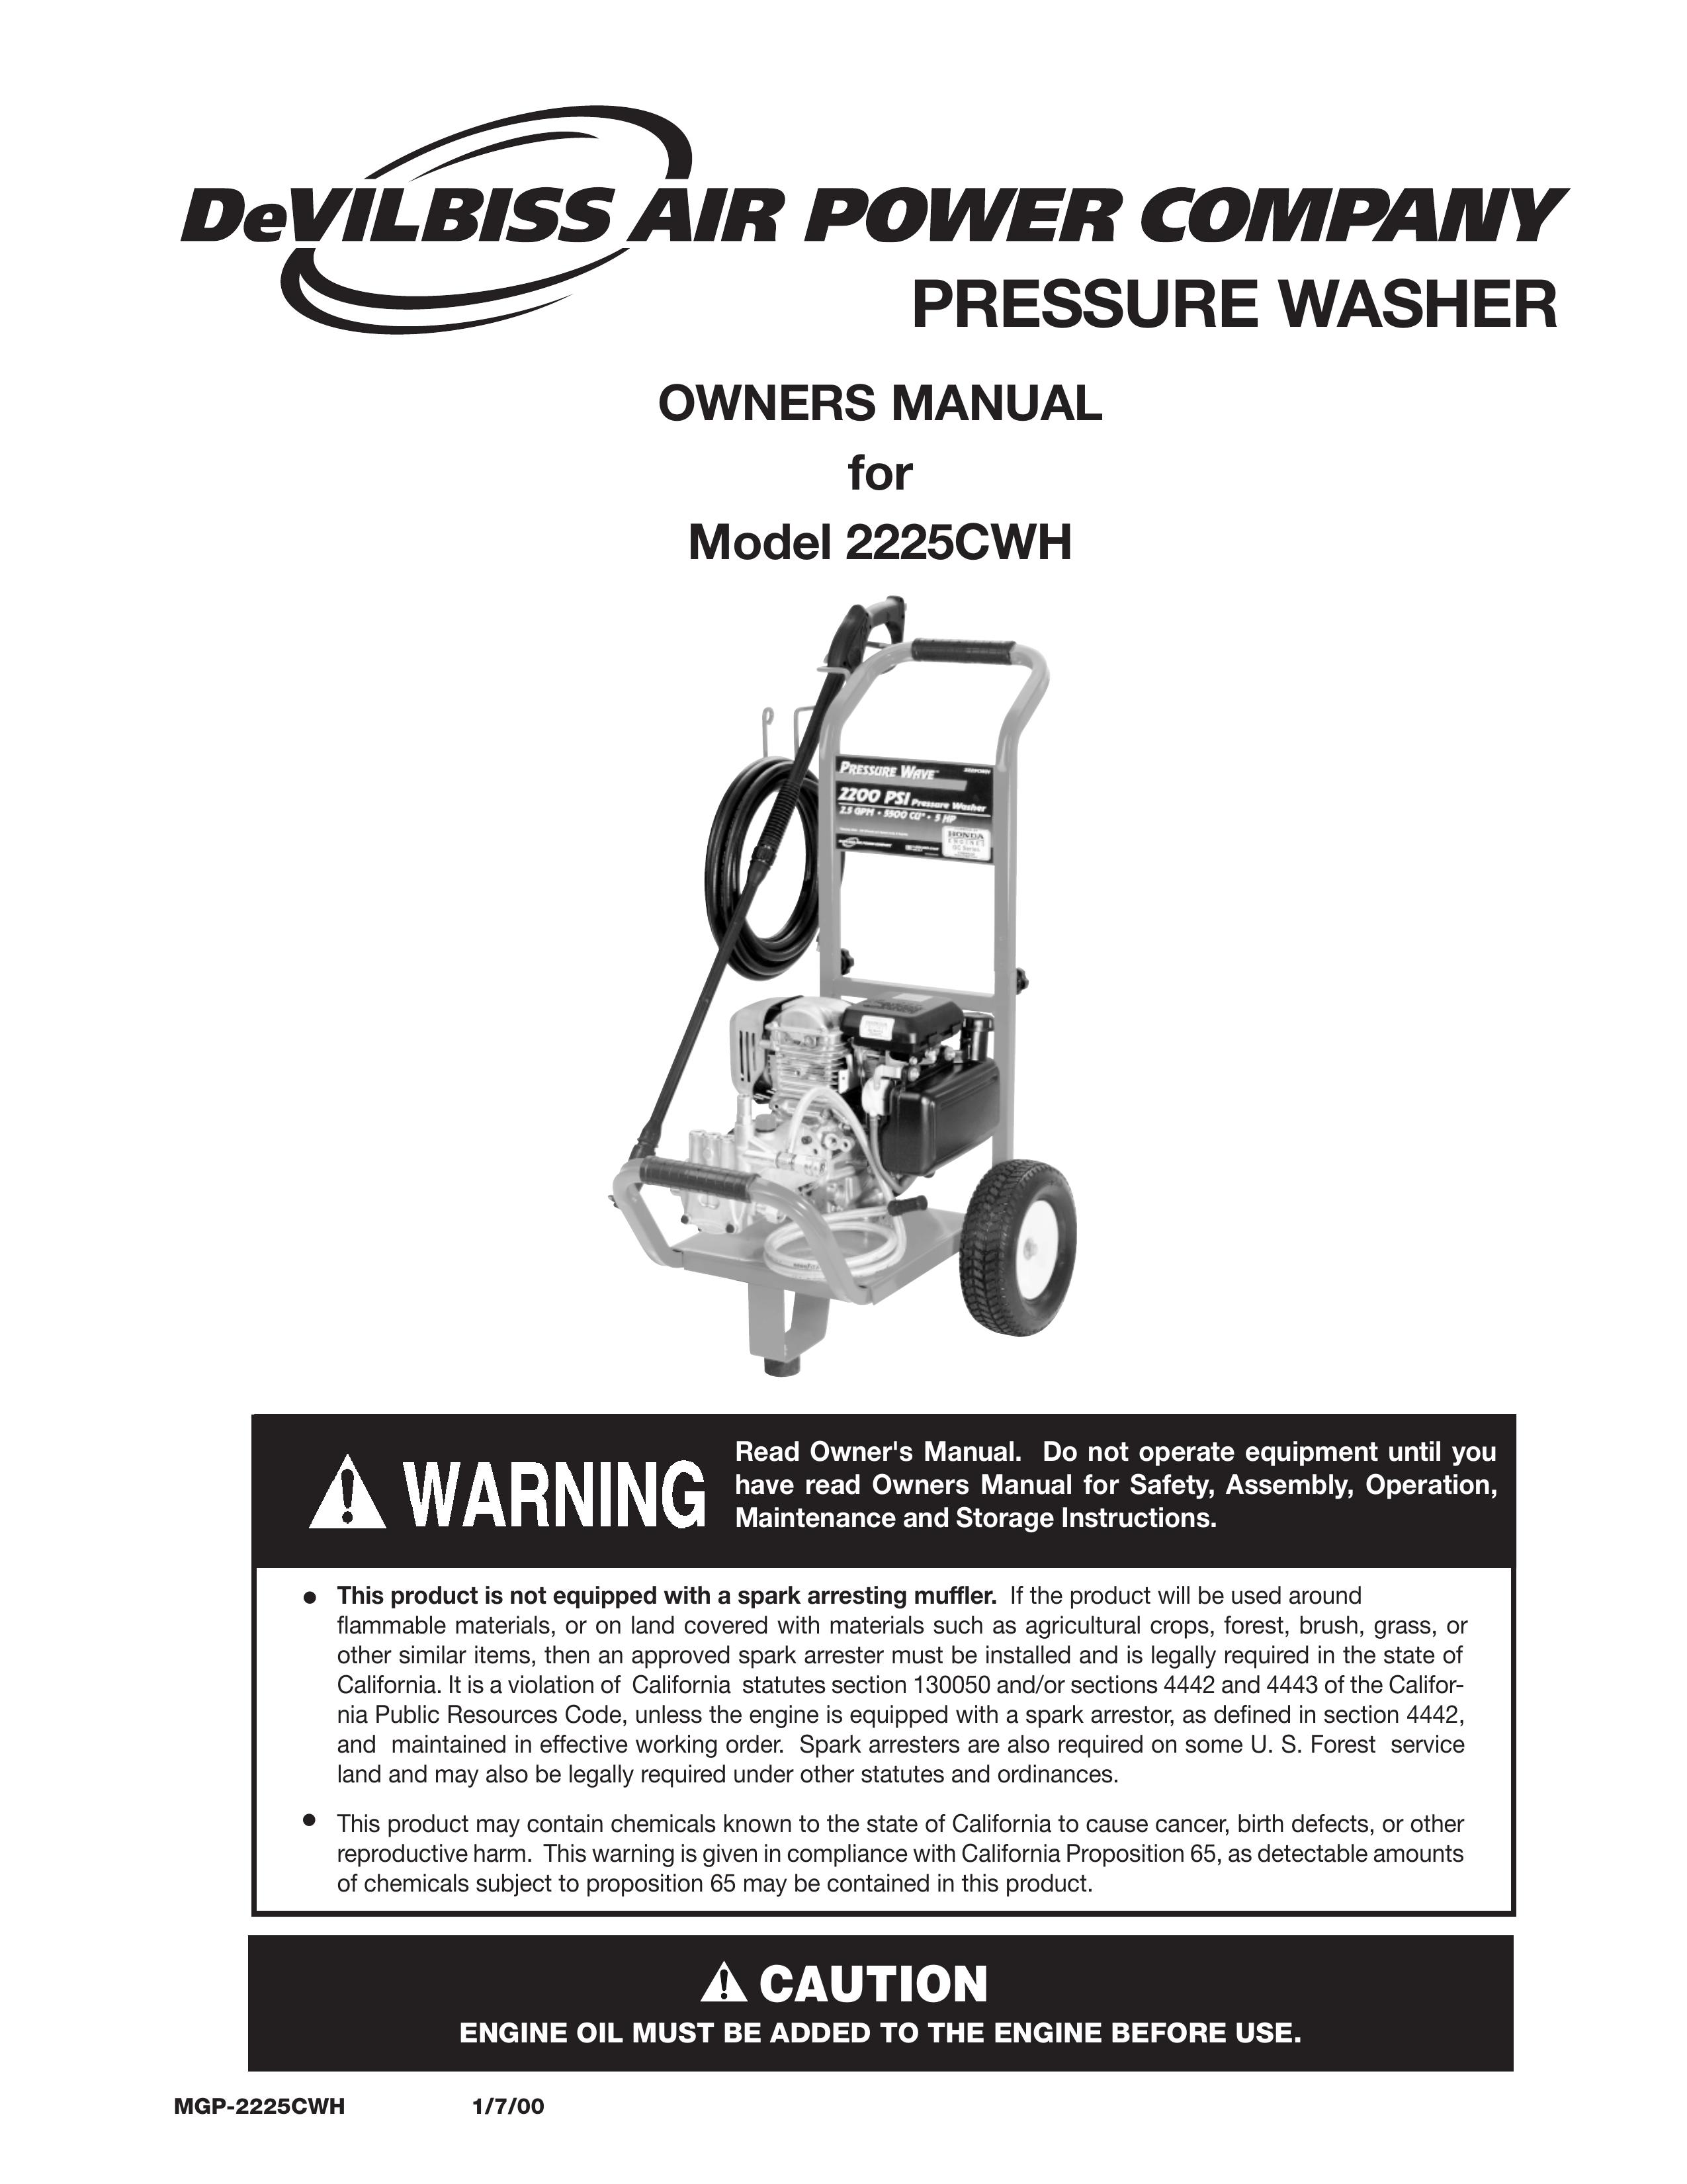 DeVillbiss Air Power Company 2225CWH Pressure Washer User Manual